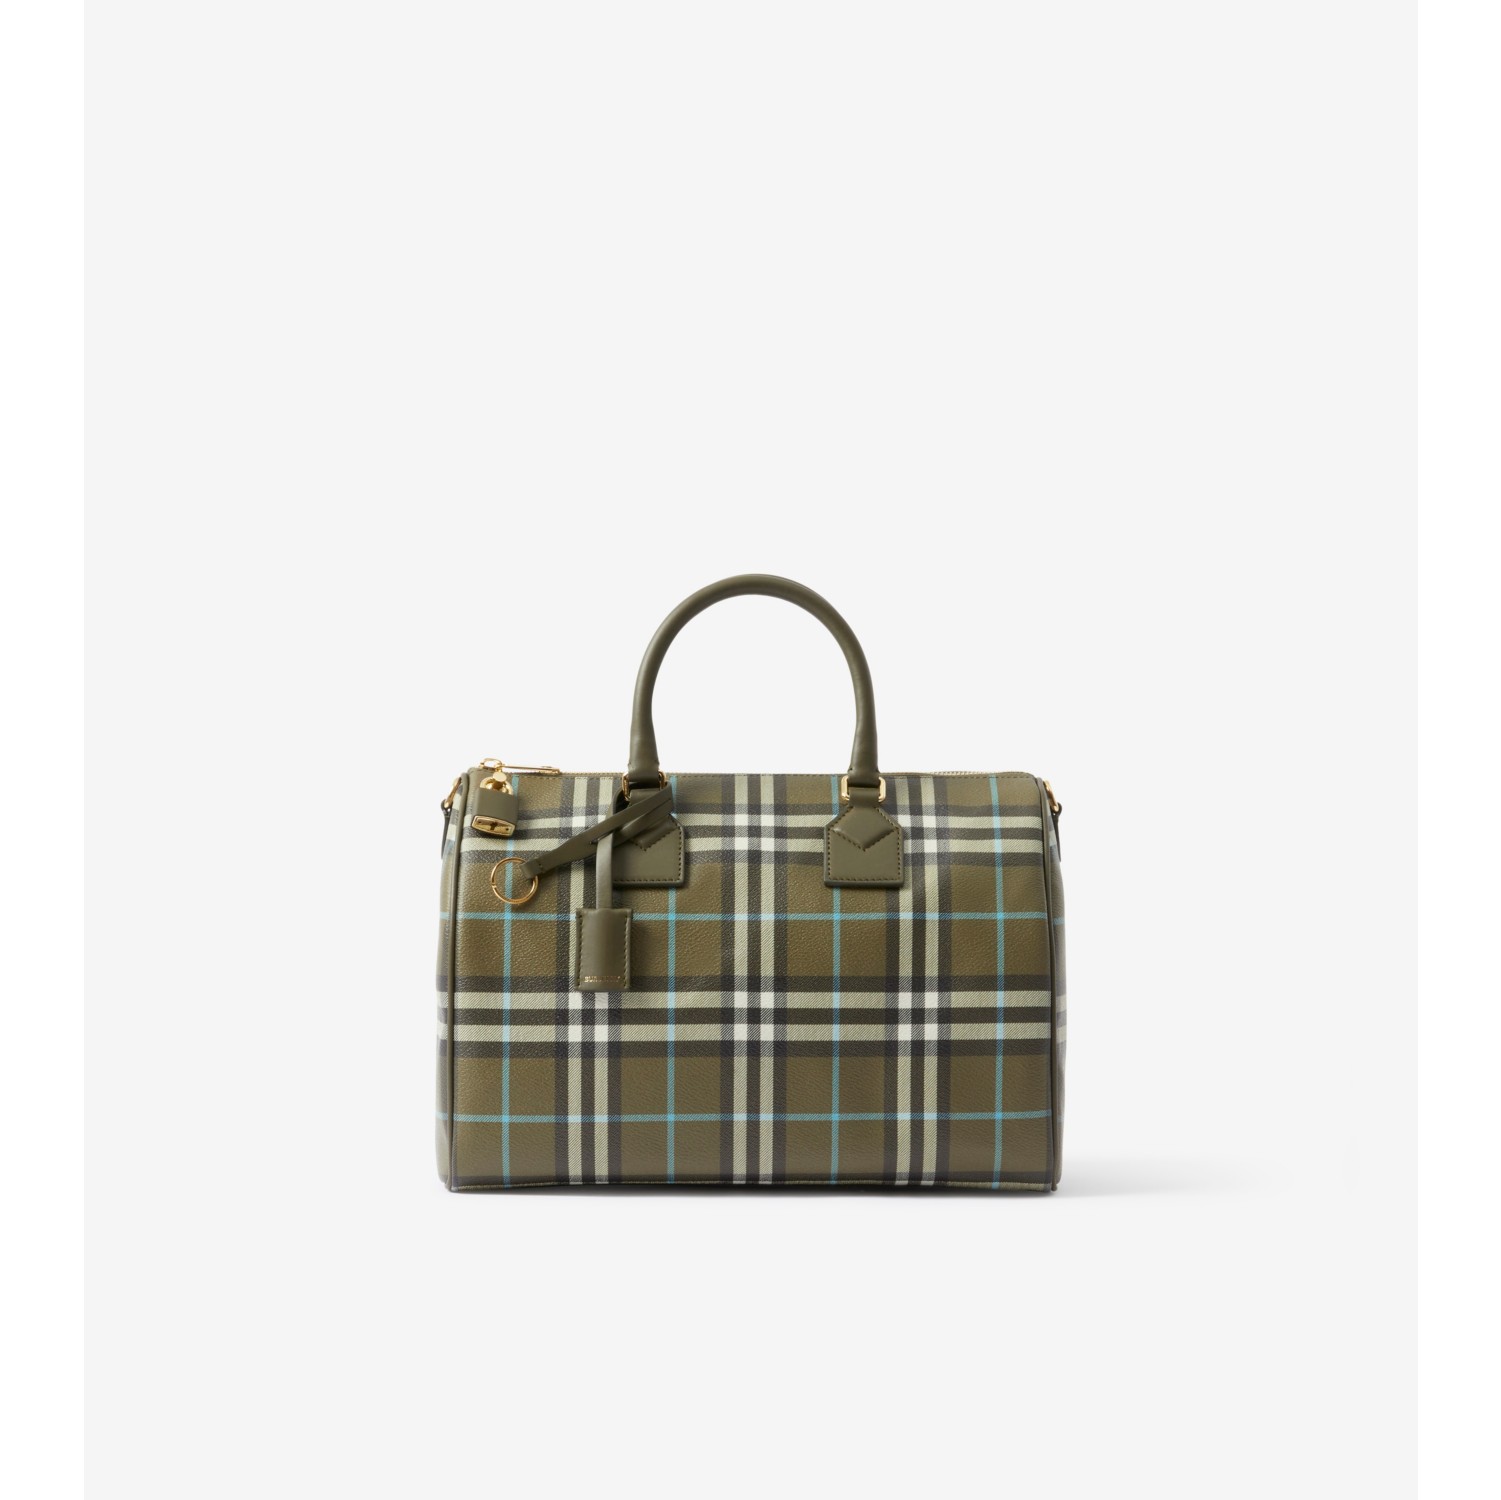 Medium Check Bowling Bag in Olive green - Women | Burberry® Official